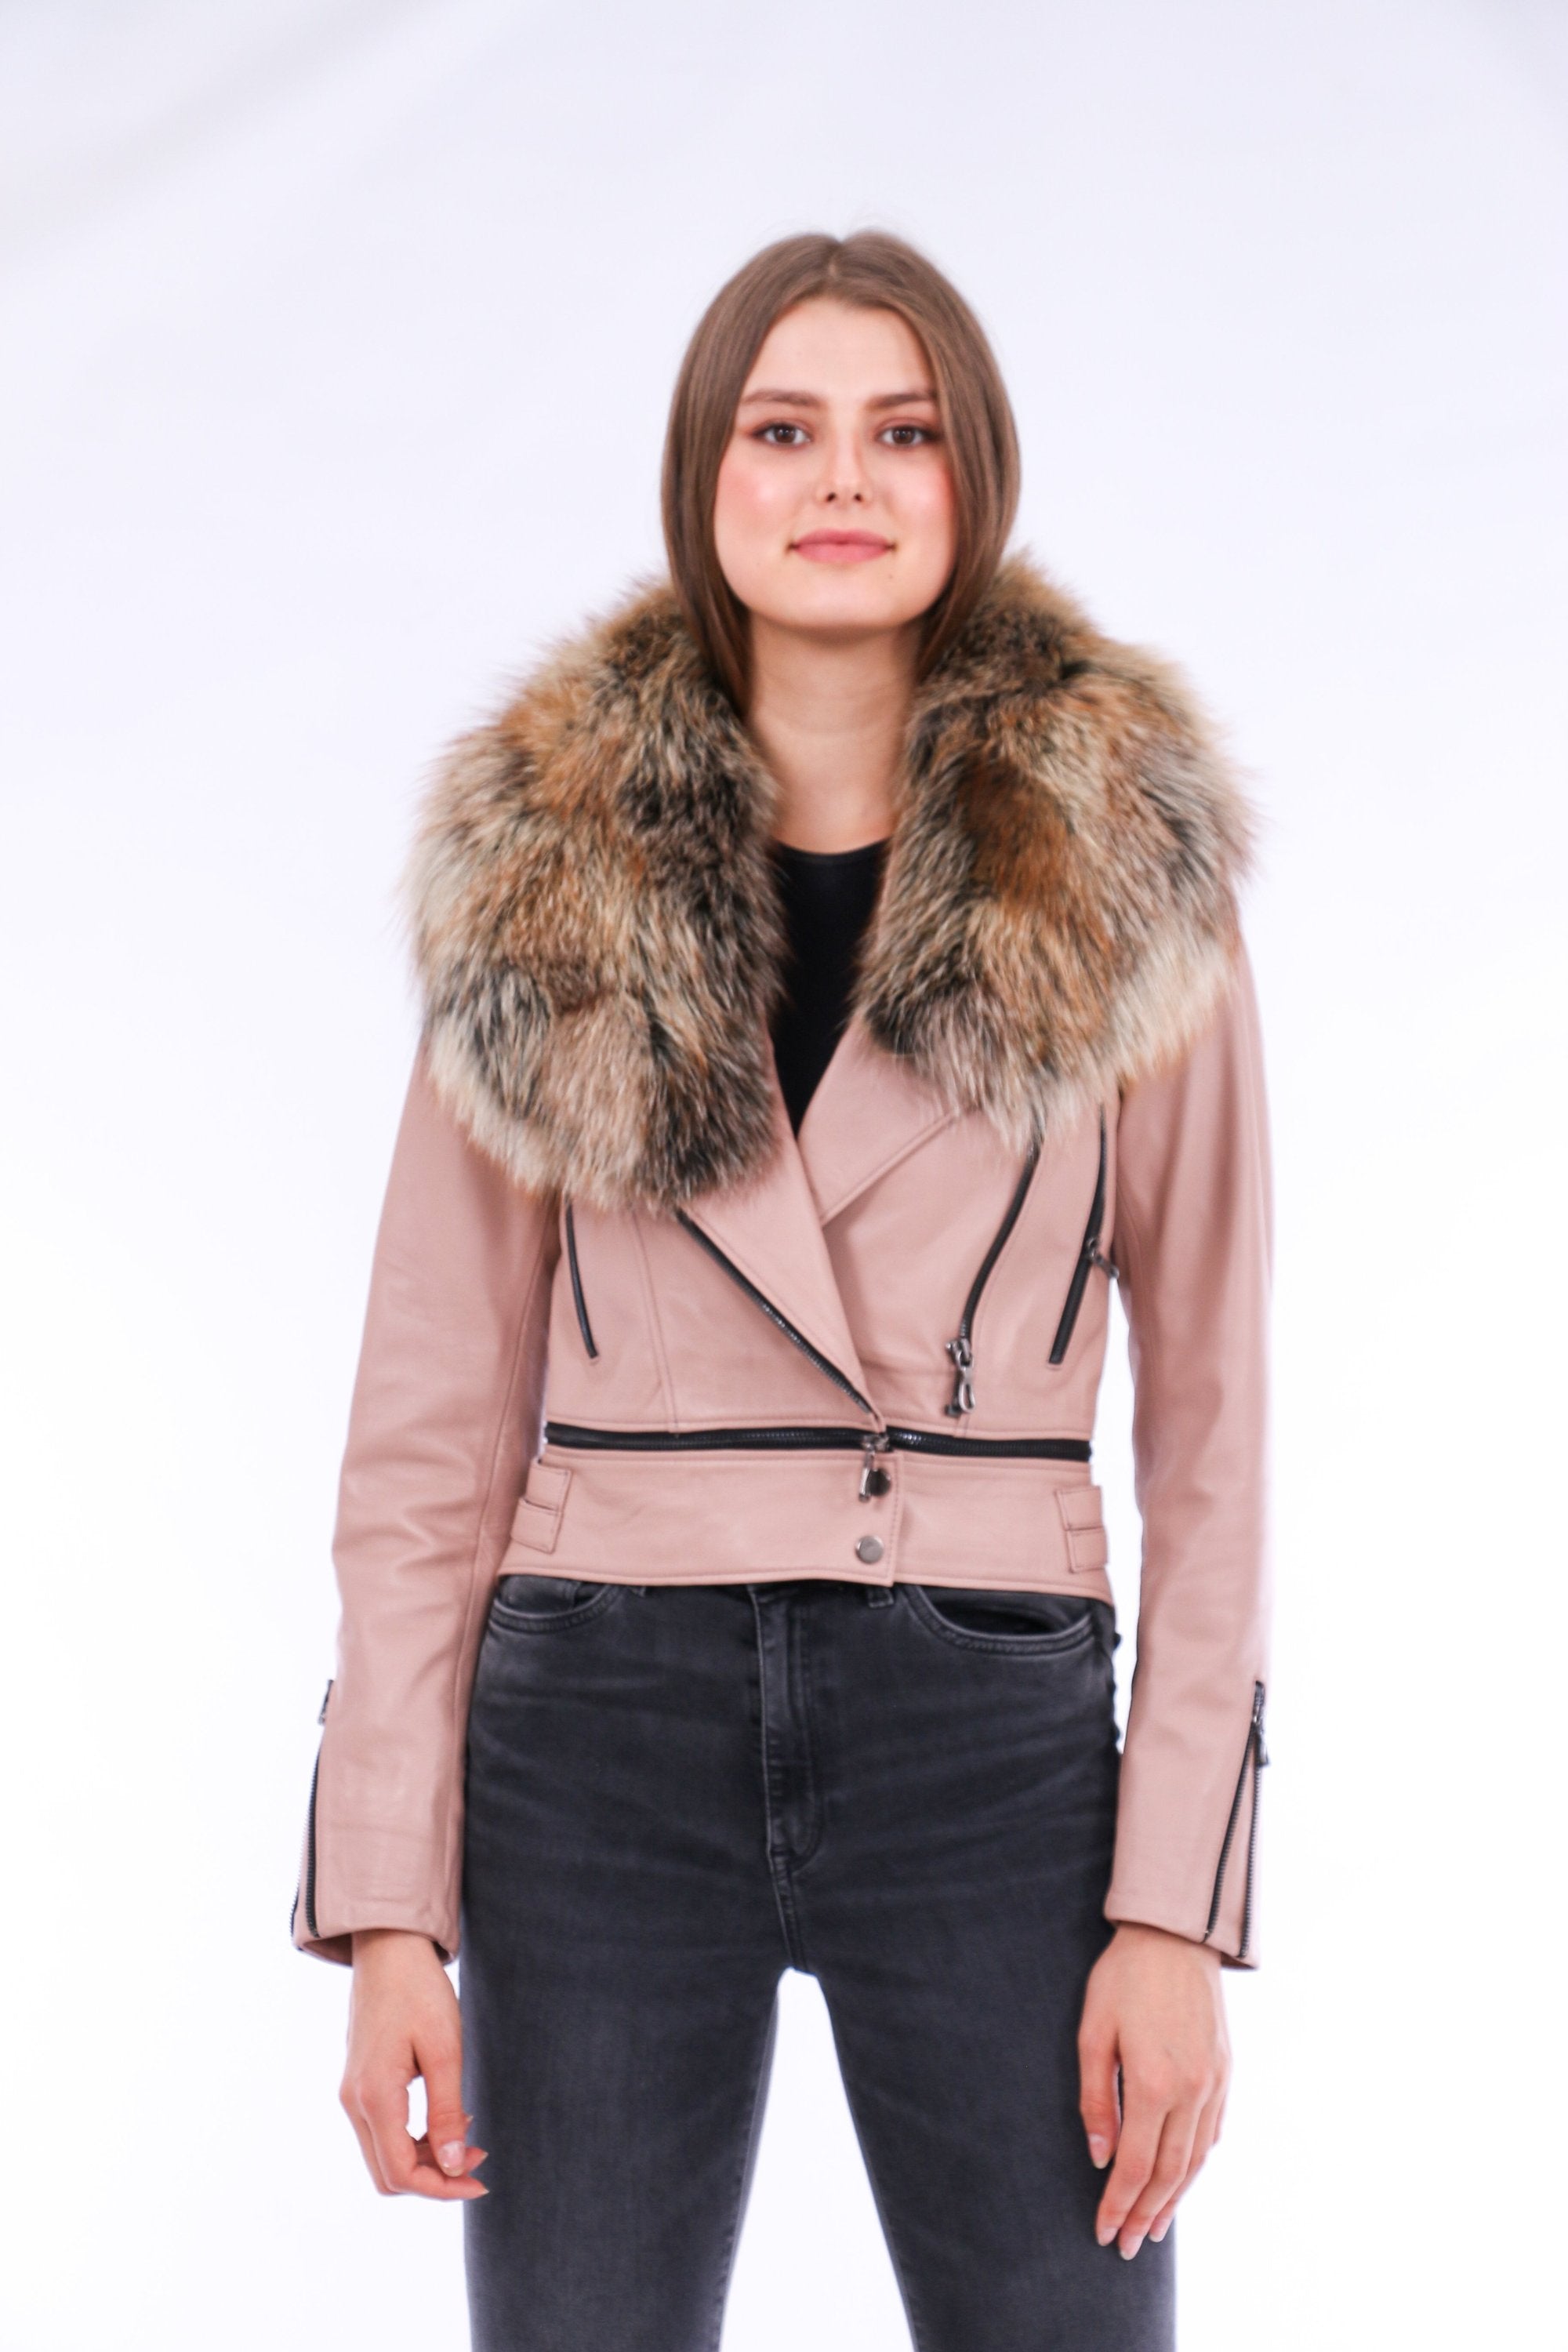 The Elegance of a Chic Pink Leather Jacket